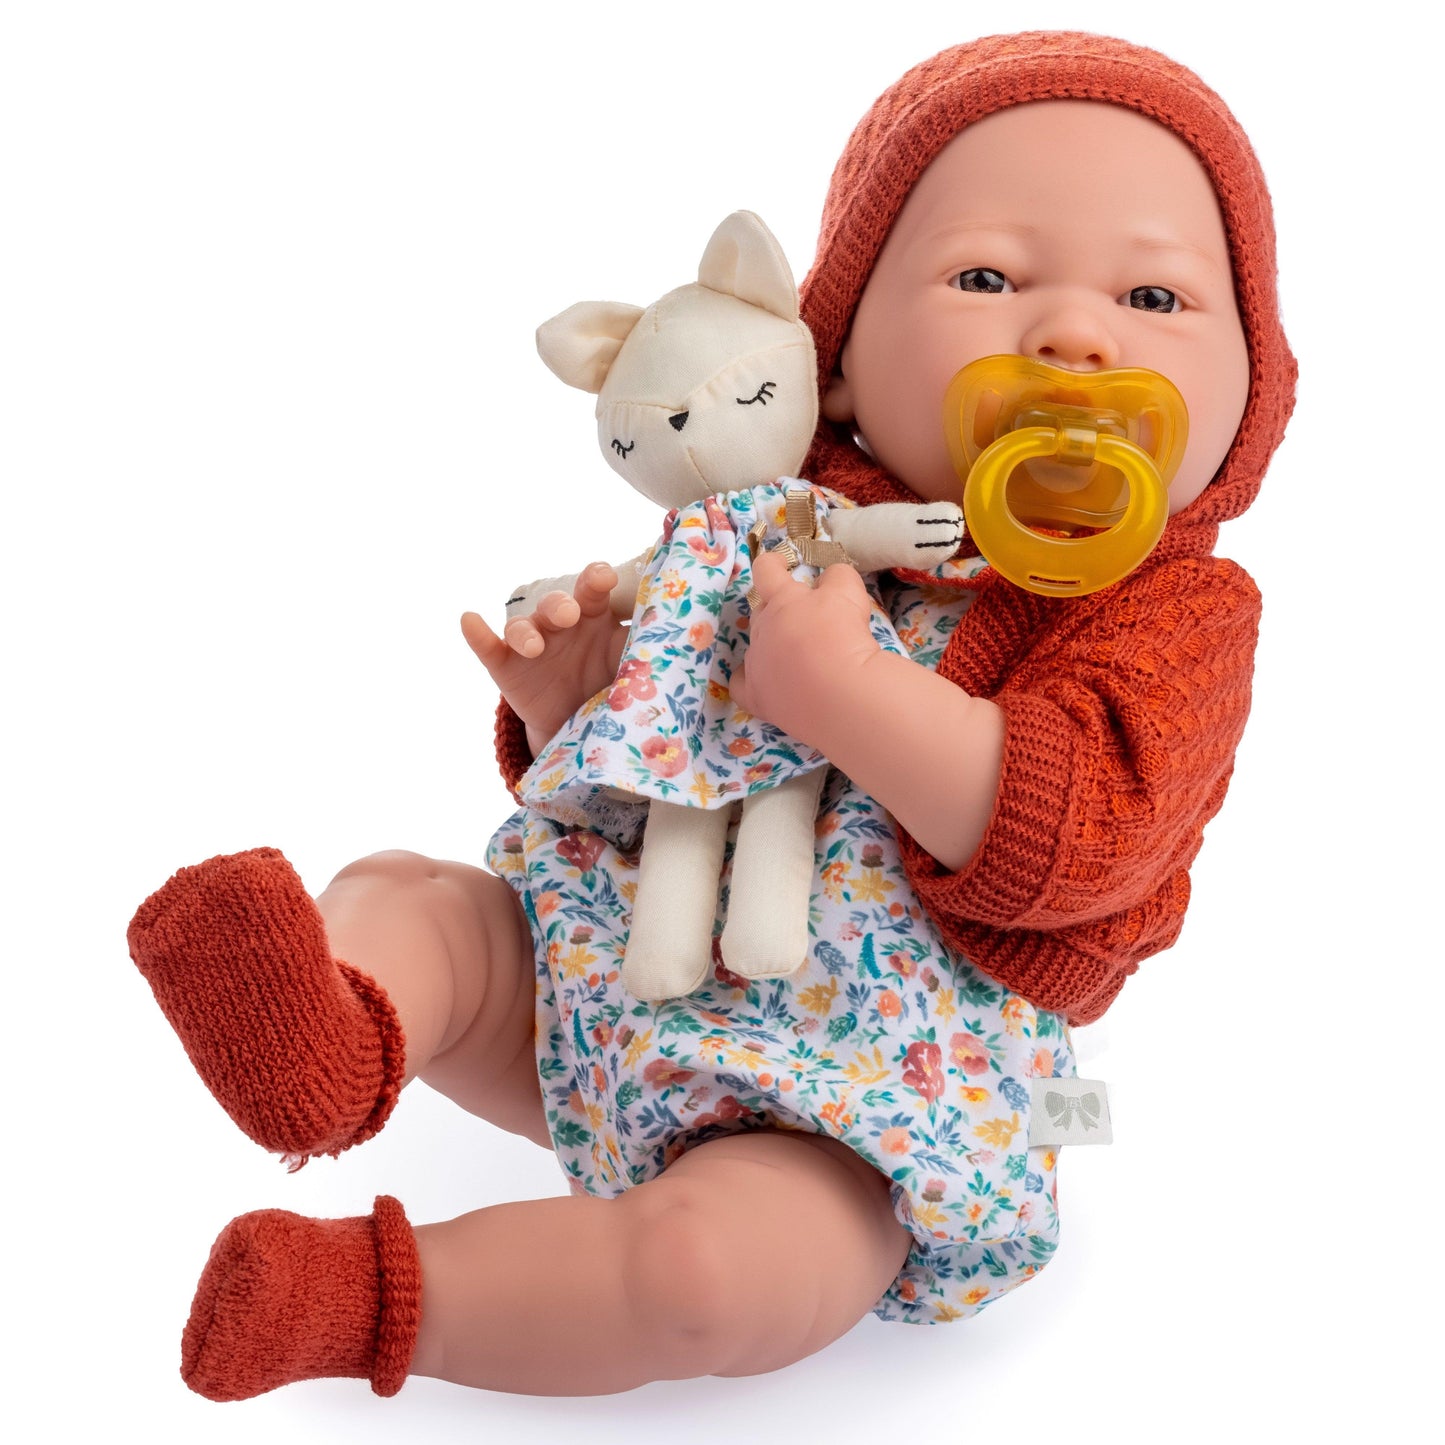 JC Toys La Newborn Anatomically Correct Real Girl Baby Doll 15" All-Vinyl NATURE Collection Designed by Berenguer Ages 2+ - JC Toys Group Inc.